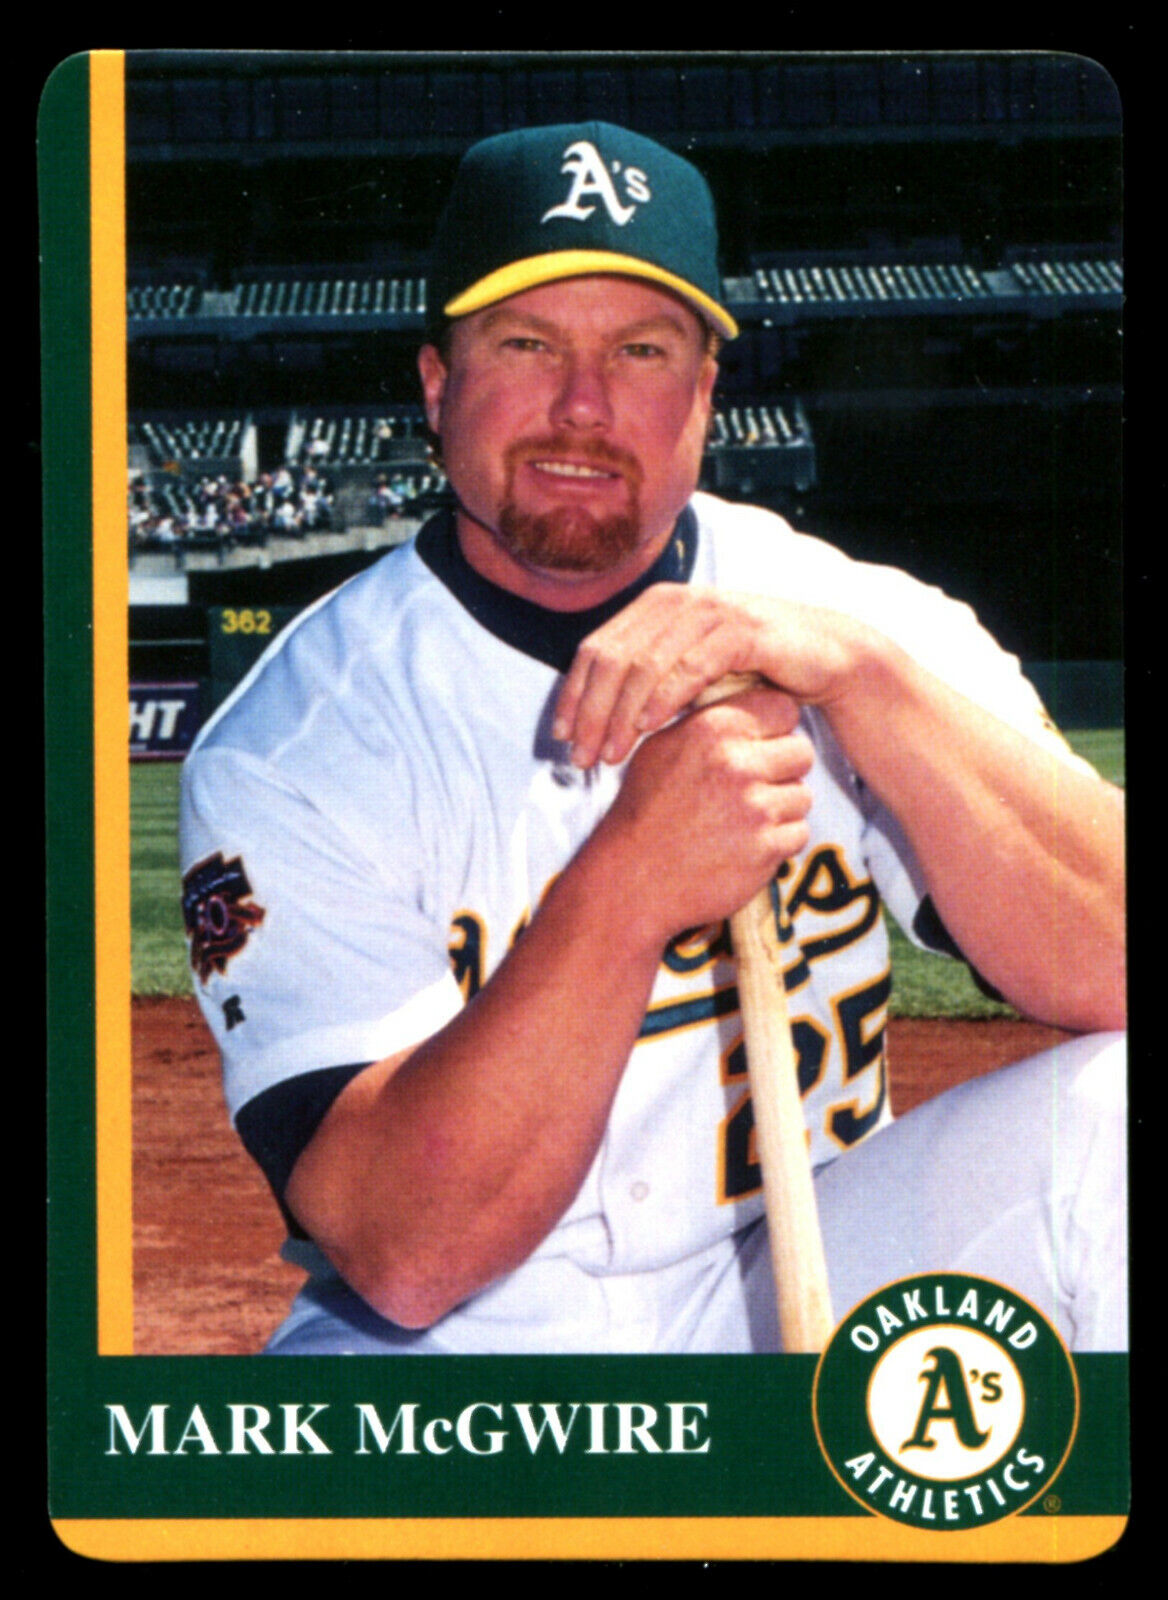 Mothers Cookies MARK MCGWIRE OAKLAND ATHLETICS A'S 12 Different Без бренда - фотография #12